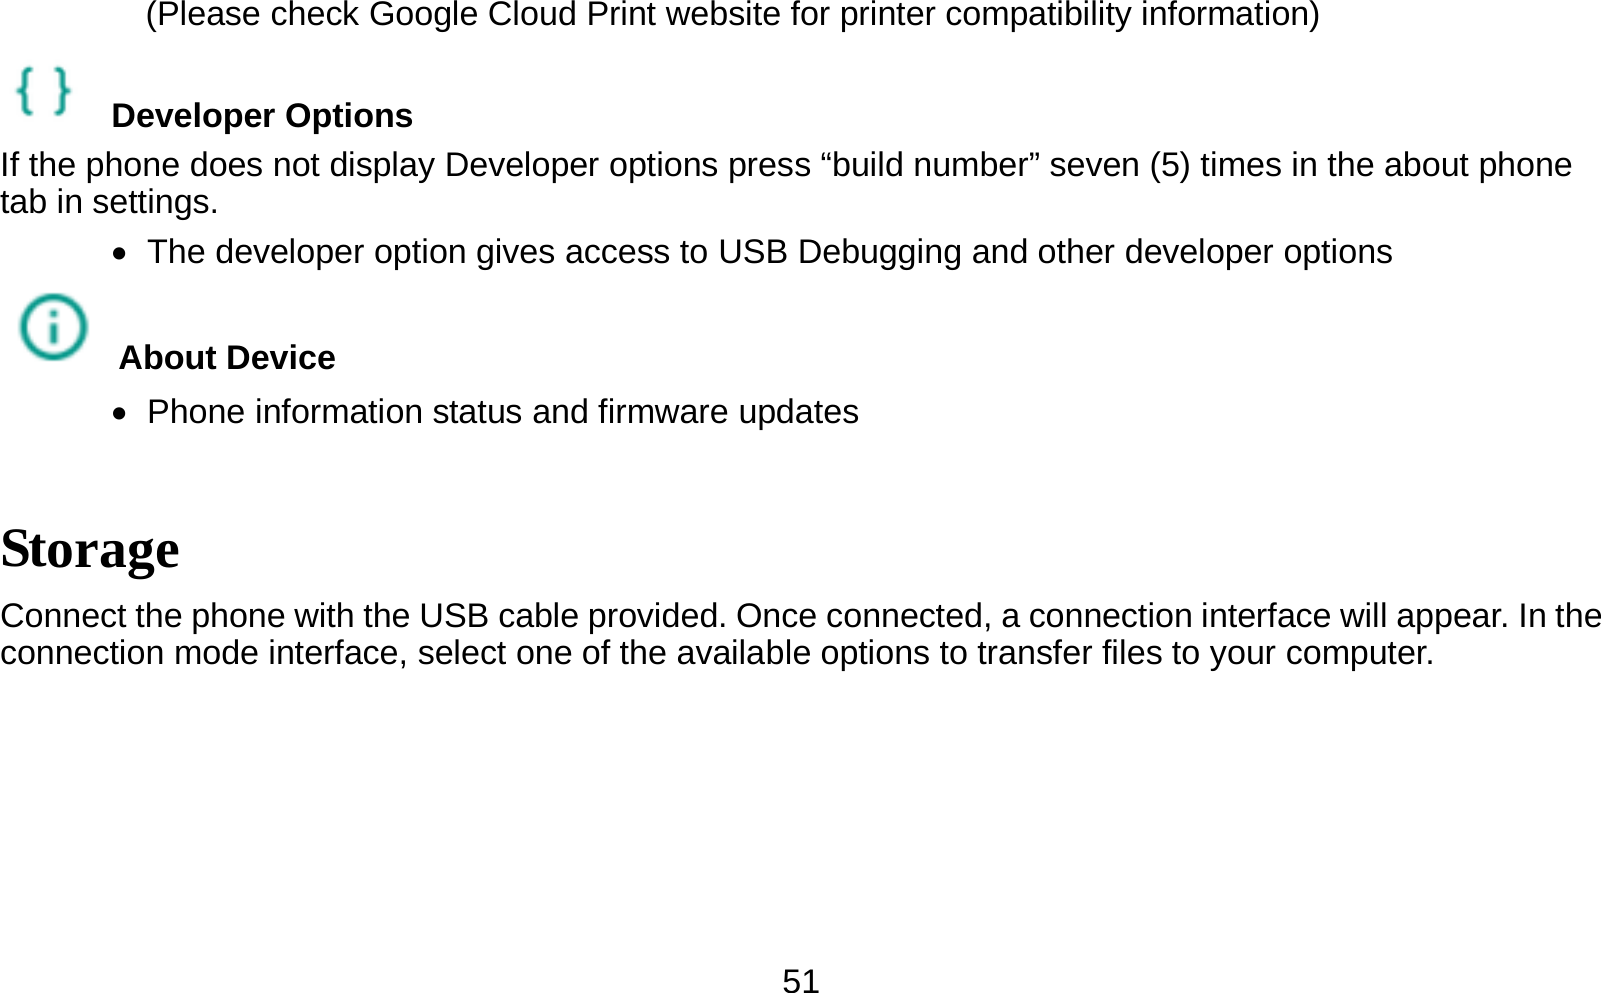   51   (Please check Google Cloud Print website for printer compatibility information)    Developer Options  If the phone does not display Developer options press “build number” seven (5) times in the about phone tab in settings.      The developer option gives access to USB Debugging and other developer options  About Device     Phone information status and firmware updates Storage Connect the phone with the USB cable provided. Once connected, a connection interface will appear. In the connection mode interface, select one of the available options to transfer files to your computer.   